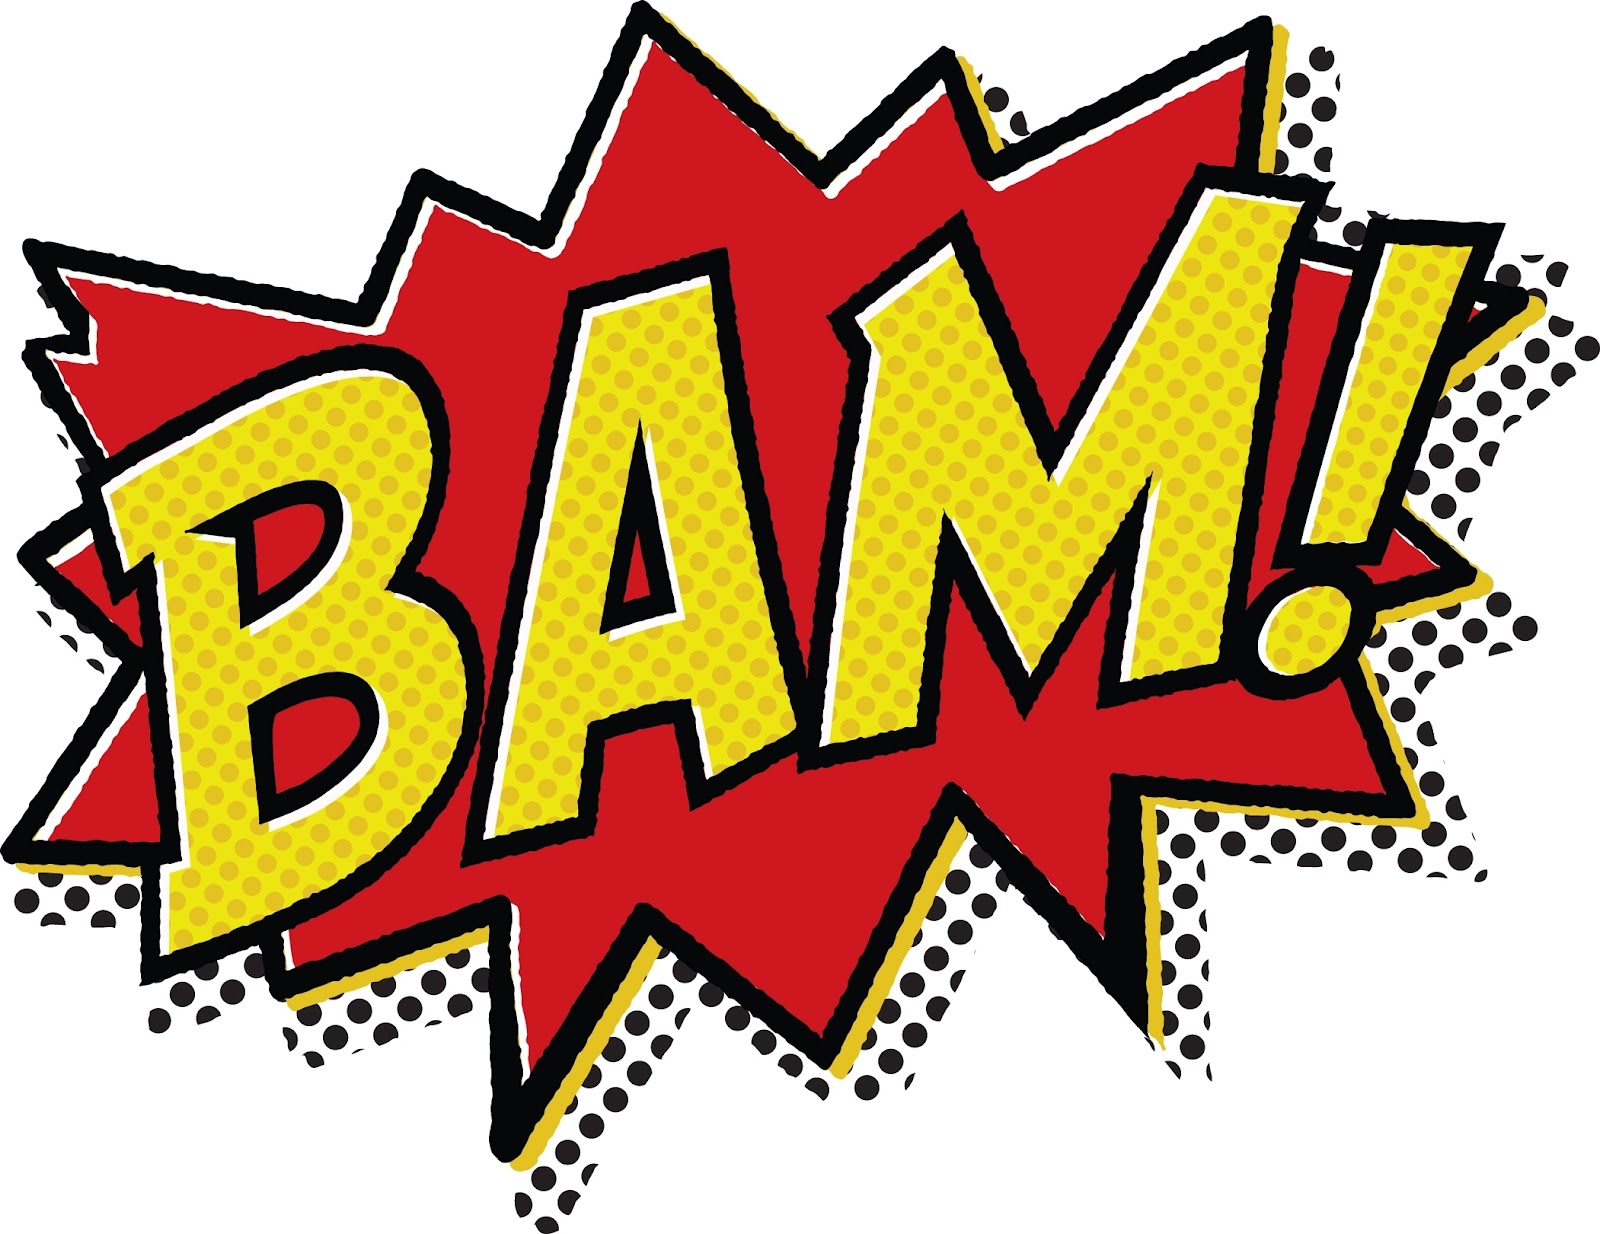 13 Batman Pow Bam Graphics Free Cliparts That You Can Download To You